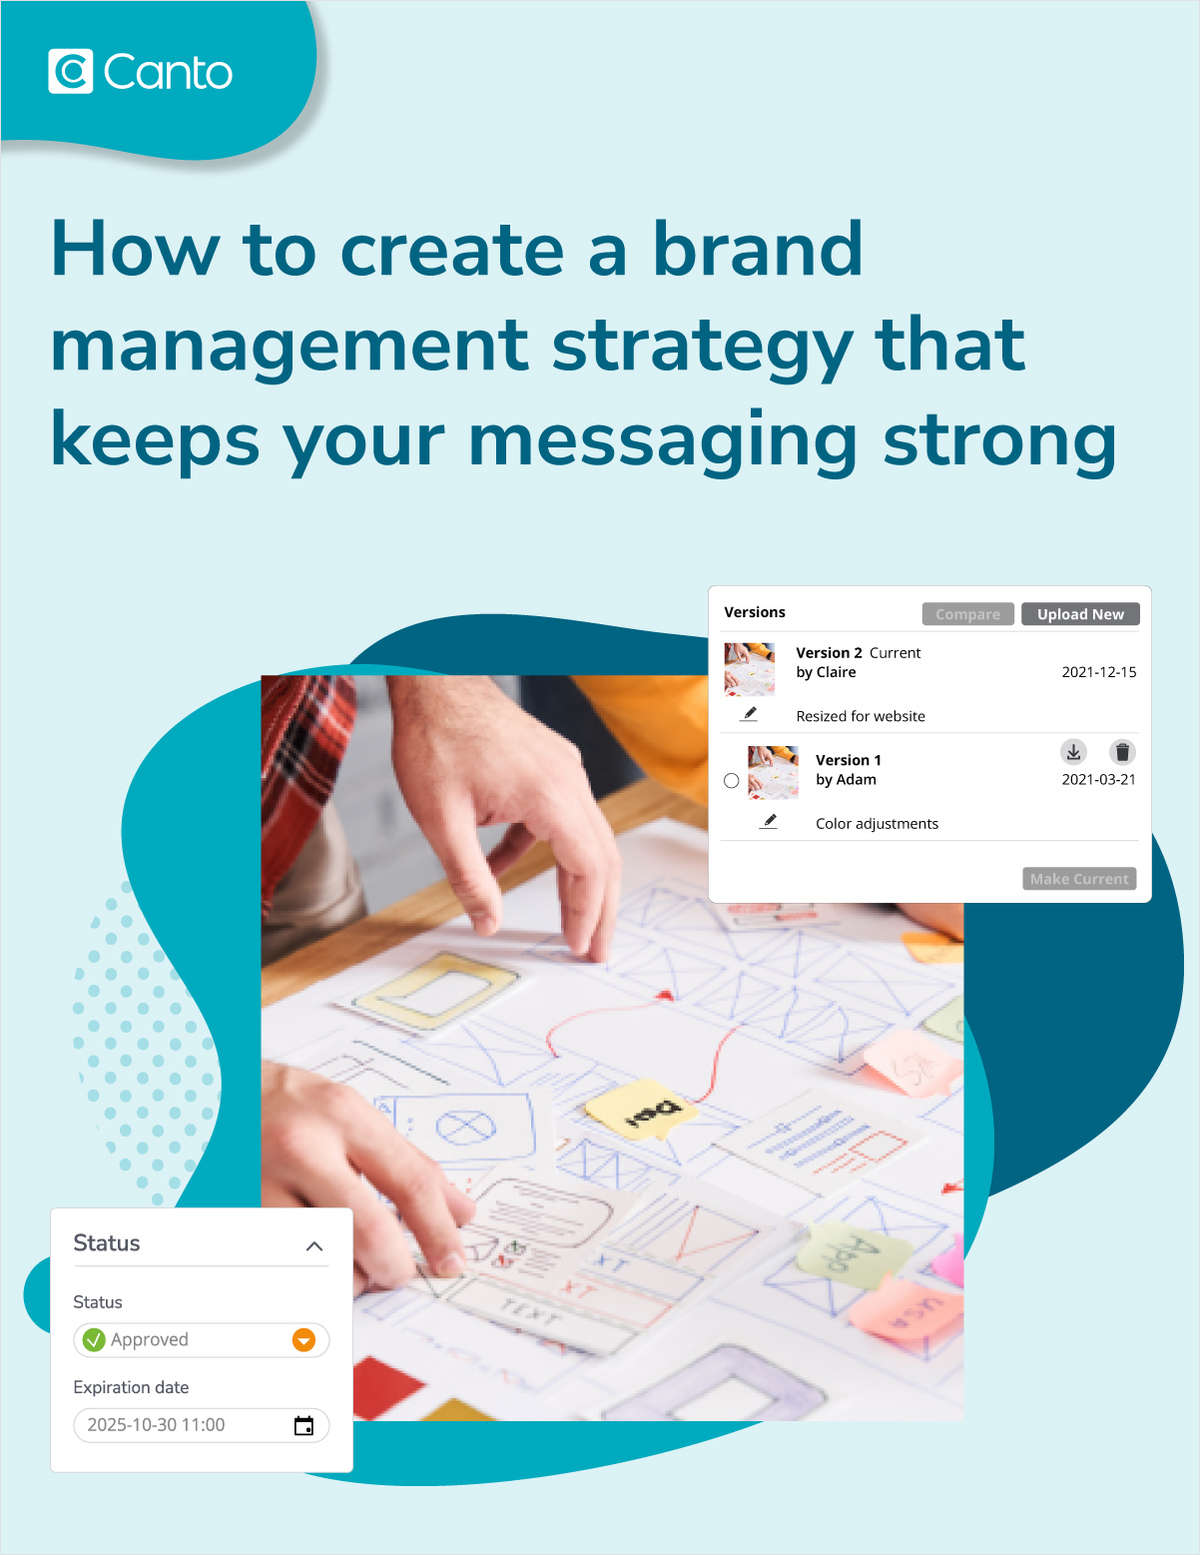 How To Create a Brand Management Strategy That Keeps Your Messaging Strong